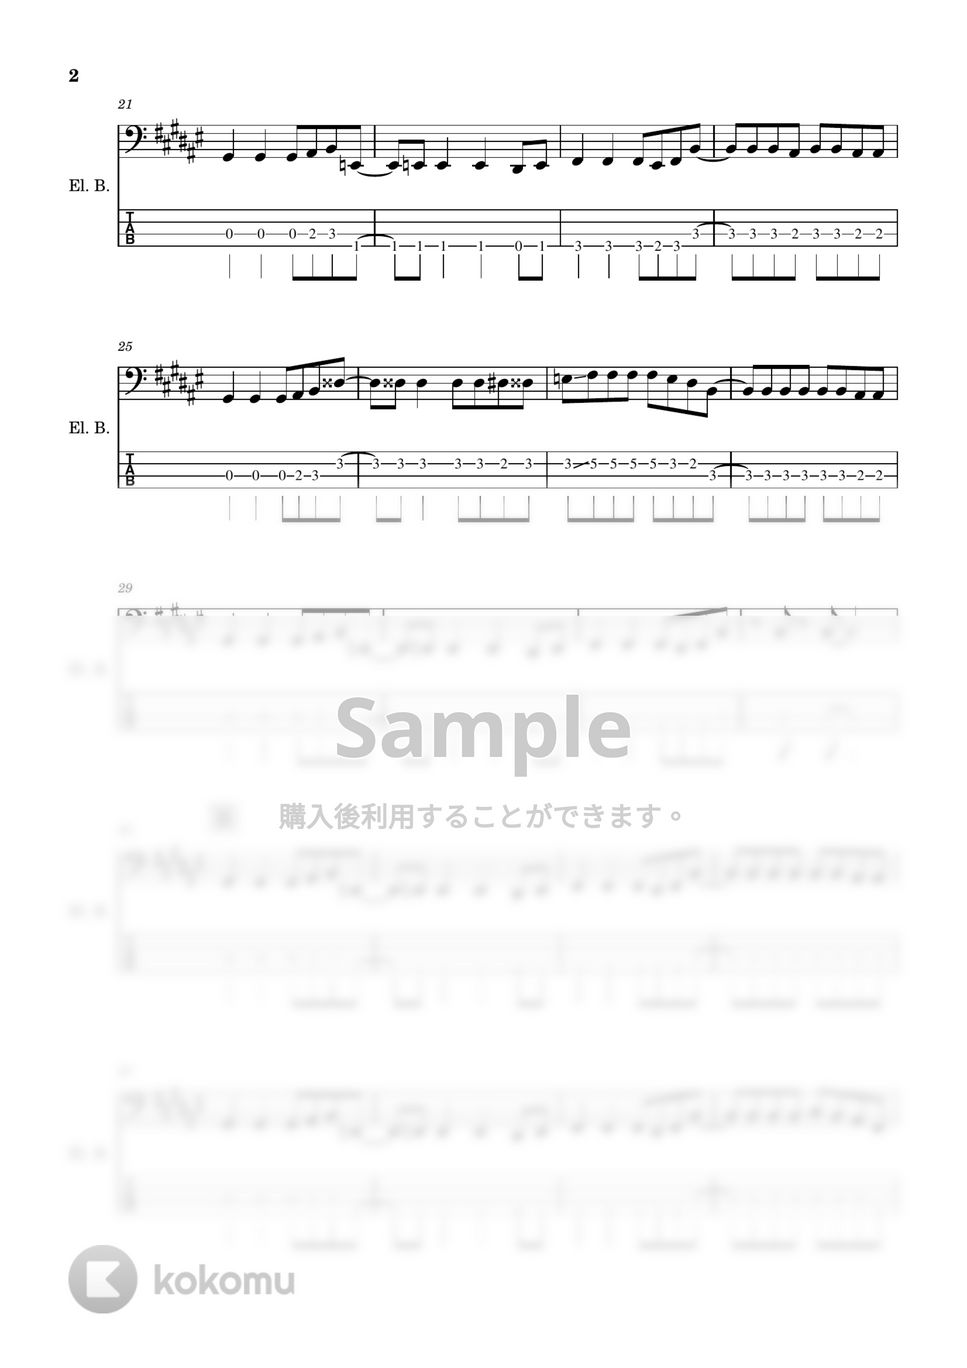 THE BACK HORN - 【ベース楽譜】 コバルトブルー / THE BACK HORN - Cobalt Blue / THE BACK HORN 【BassScore】 by Cookie's Drum Score